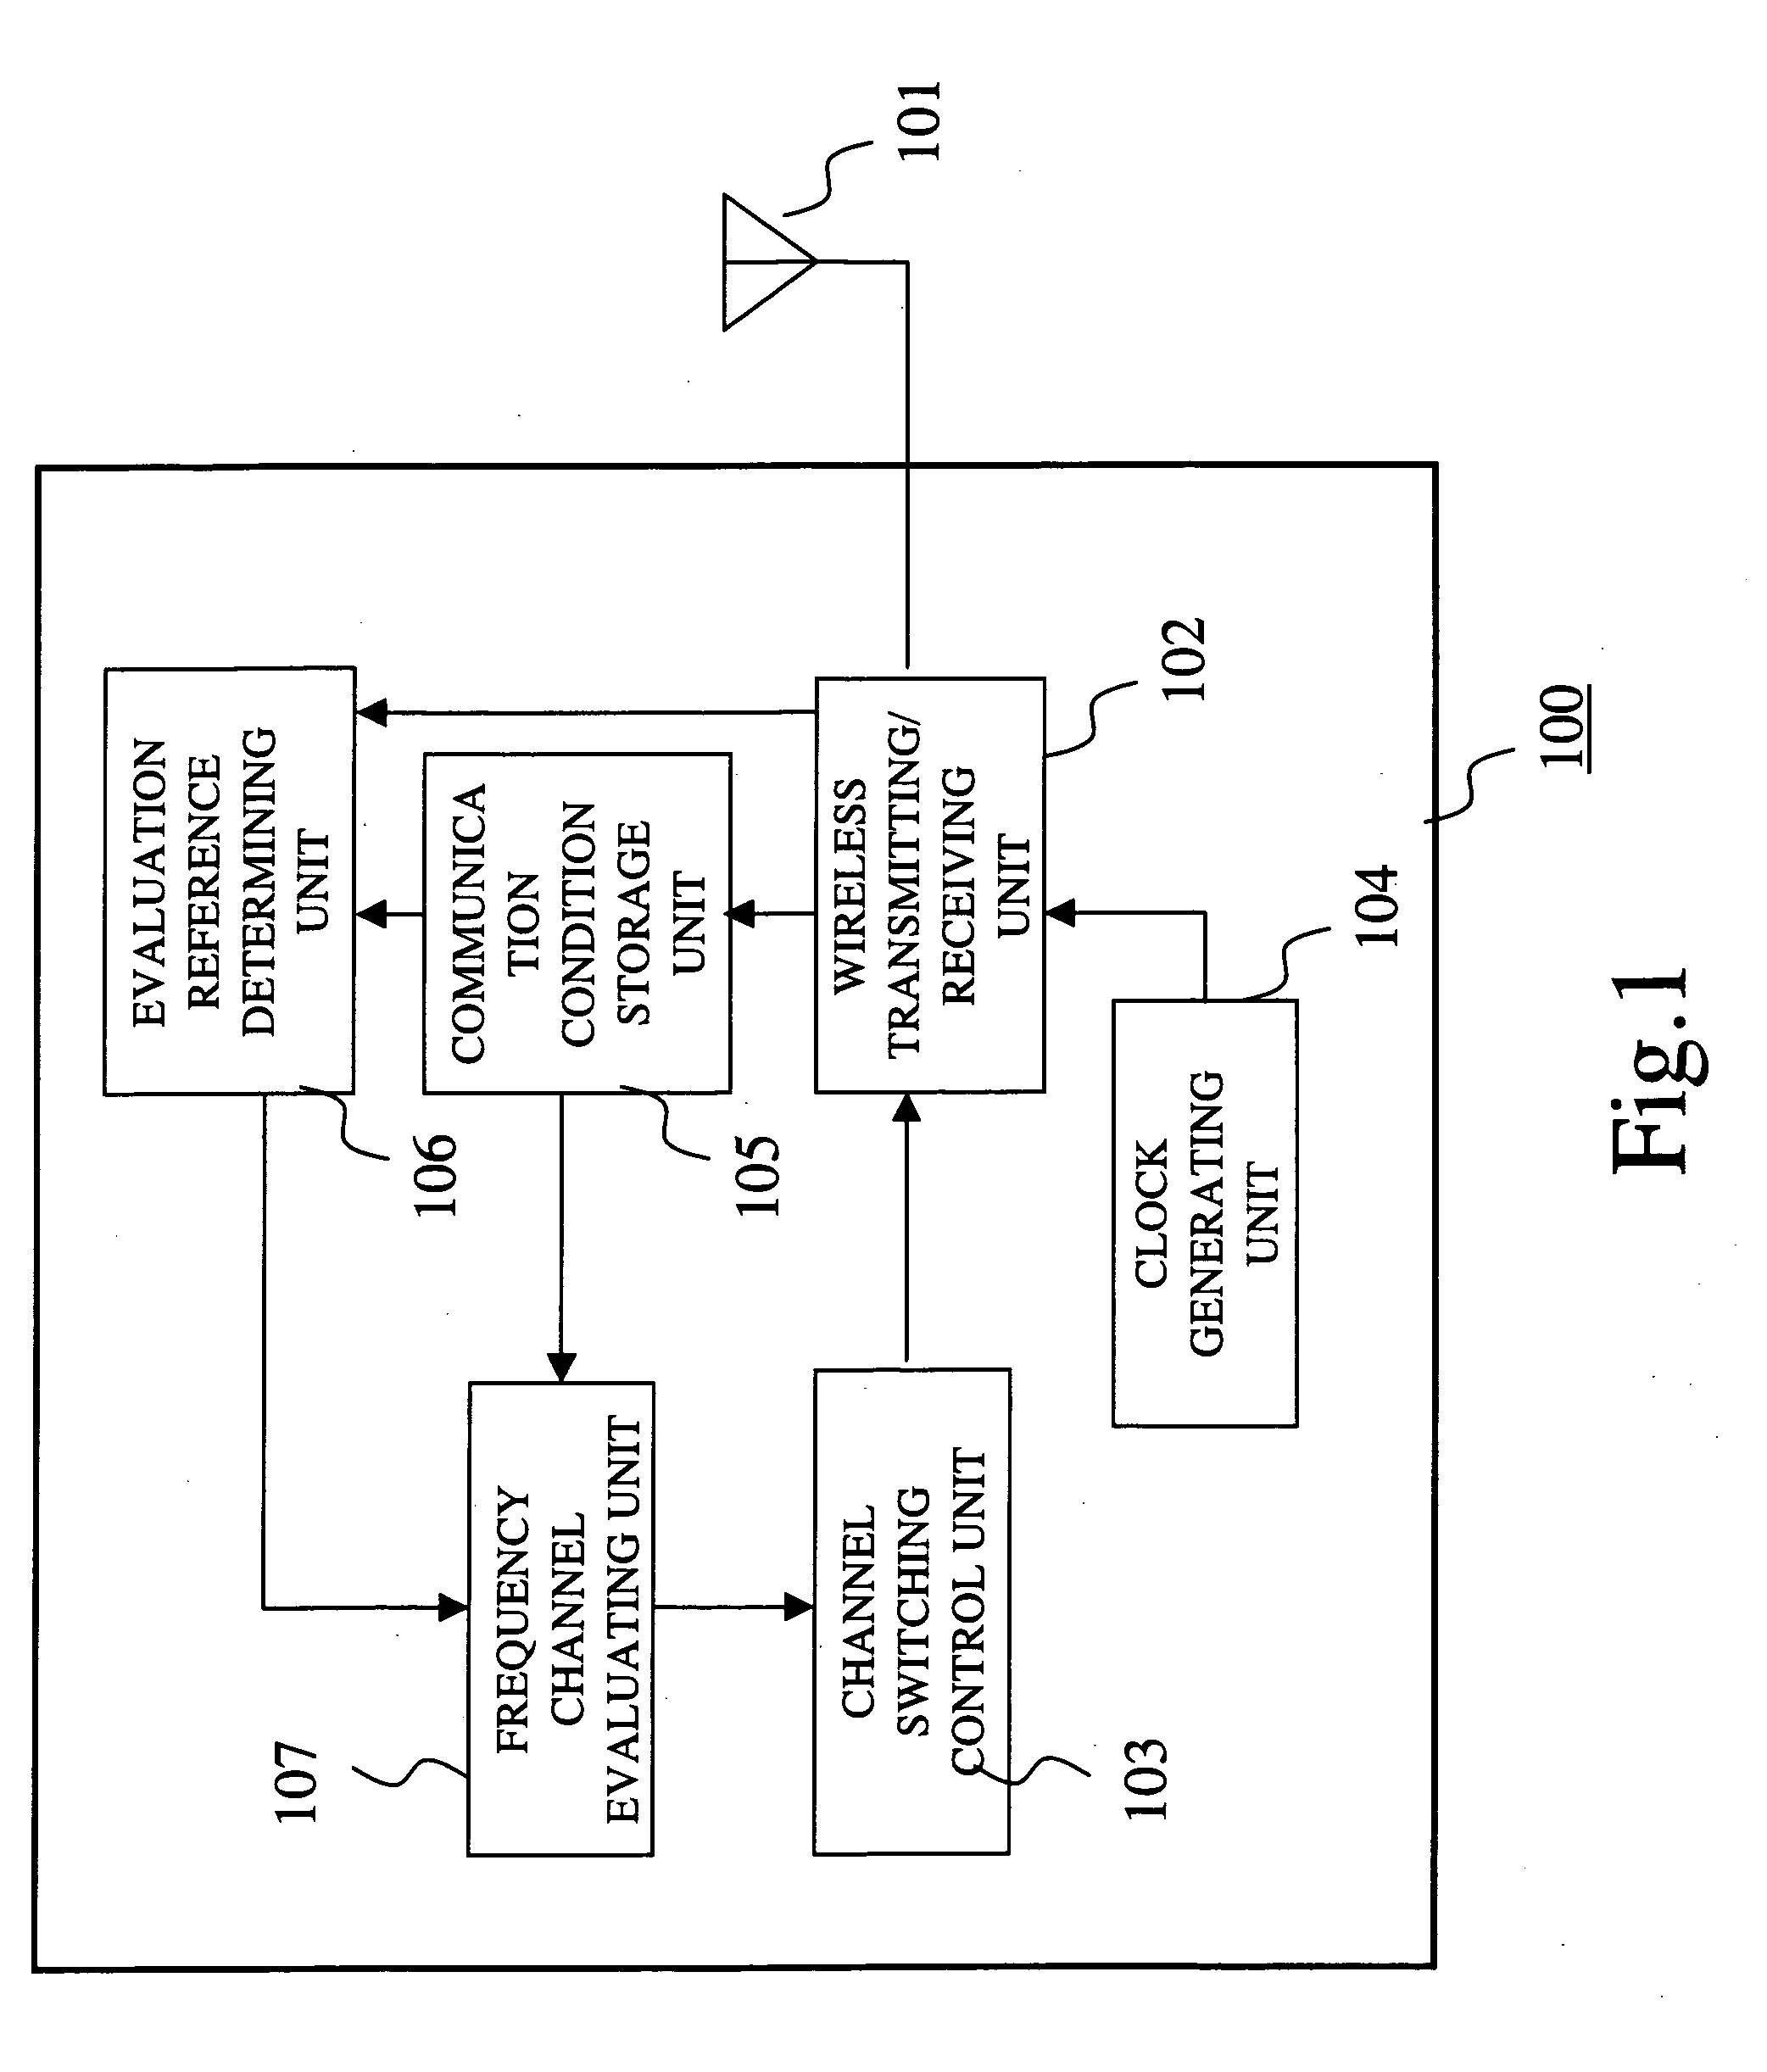 Wireless communication apparatus for selecting frequency channels